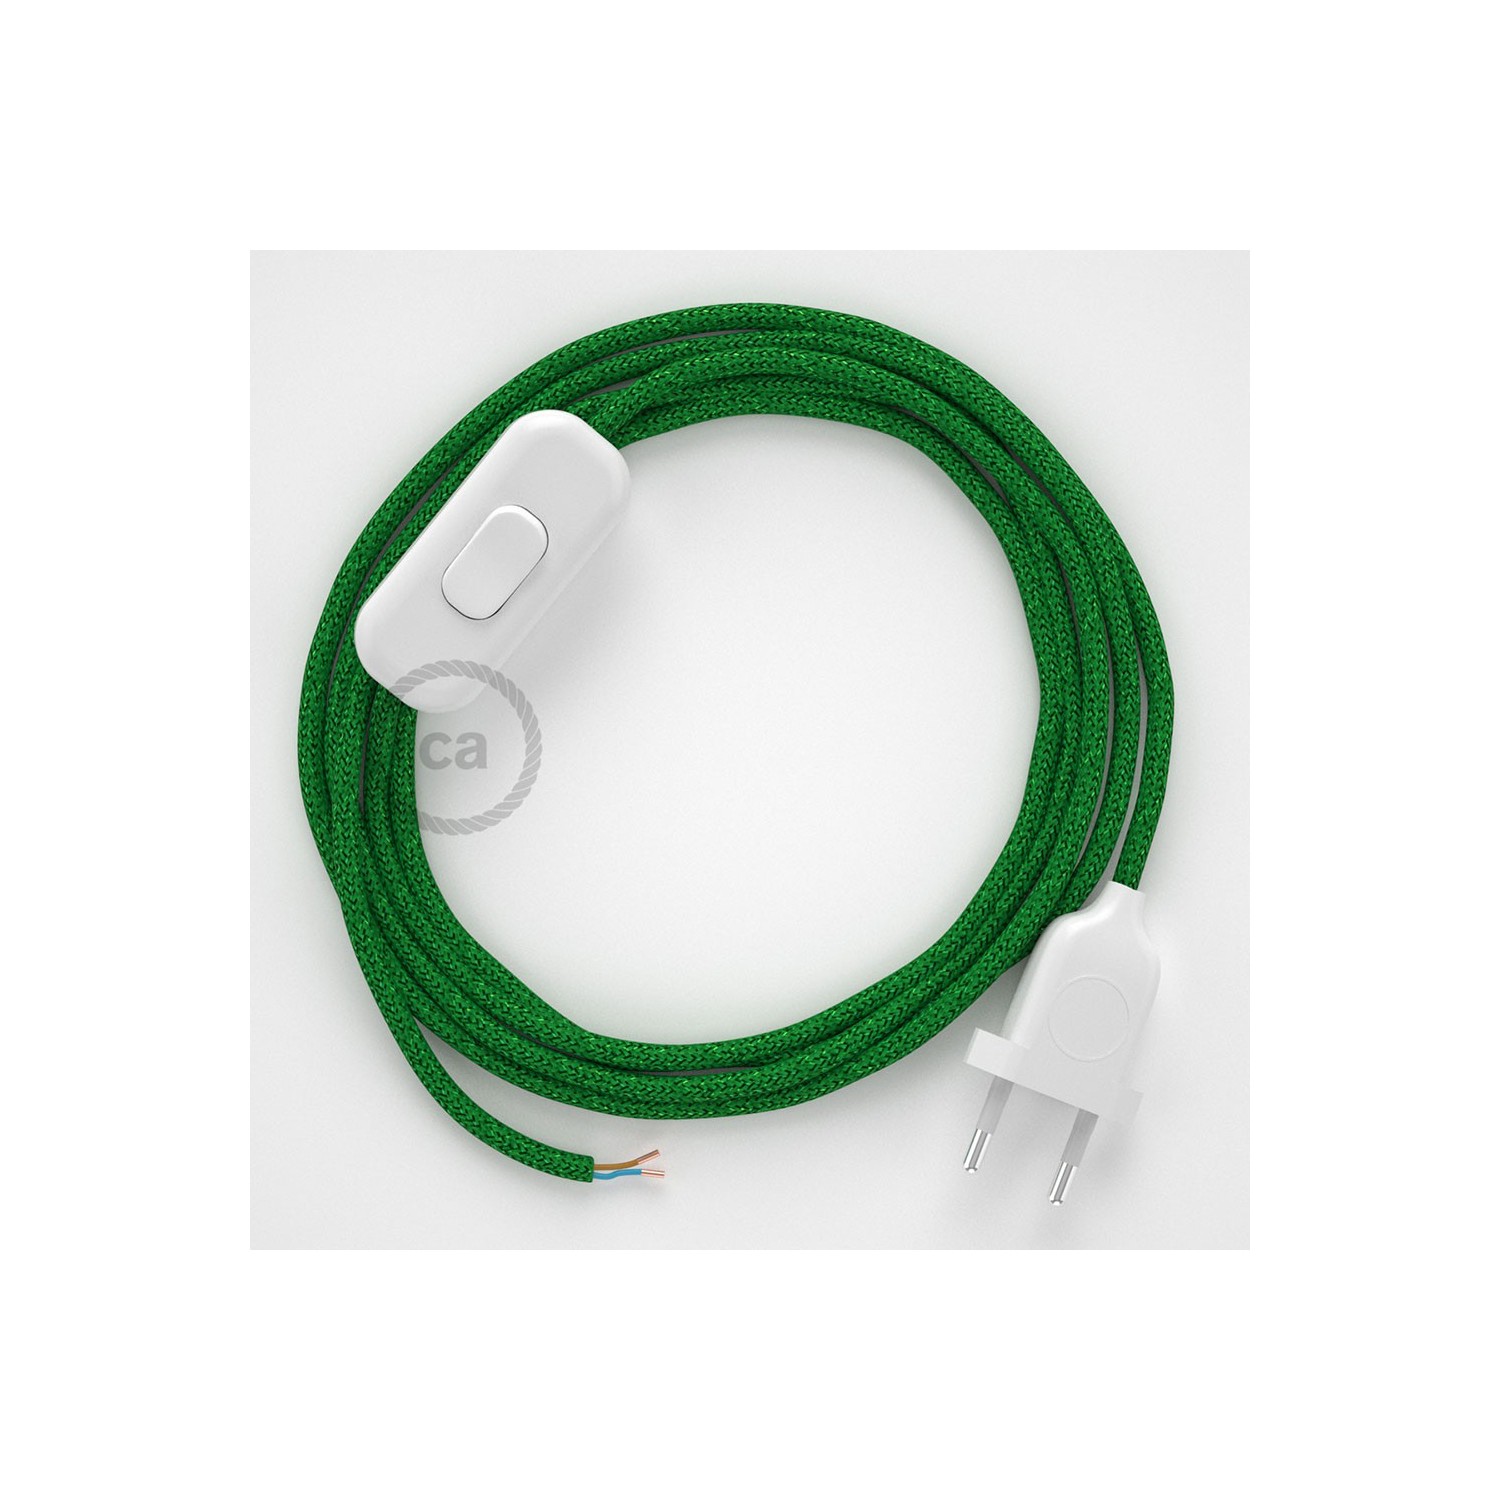 Lamp wiring, RL06 Sparkly Green Rayon 1,80 m. Choose the colour of the switch and plug.